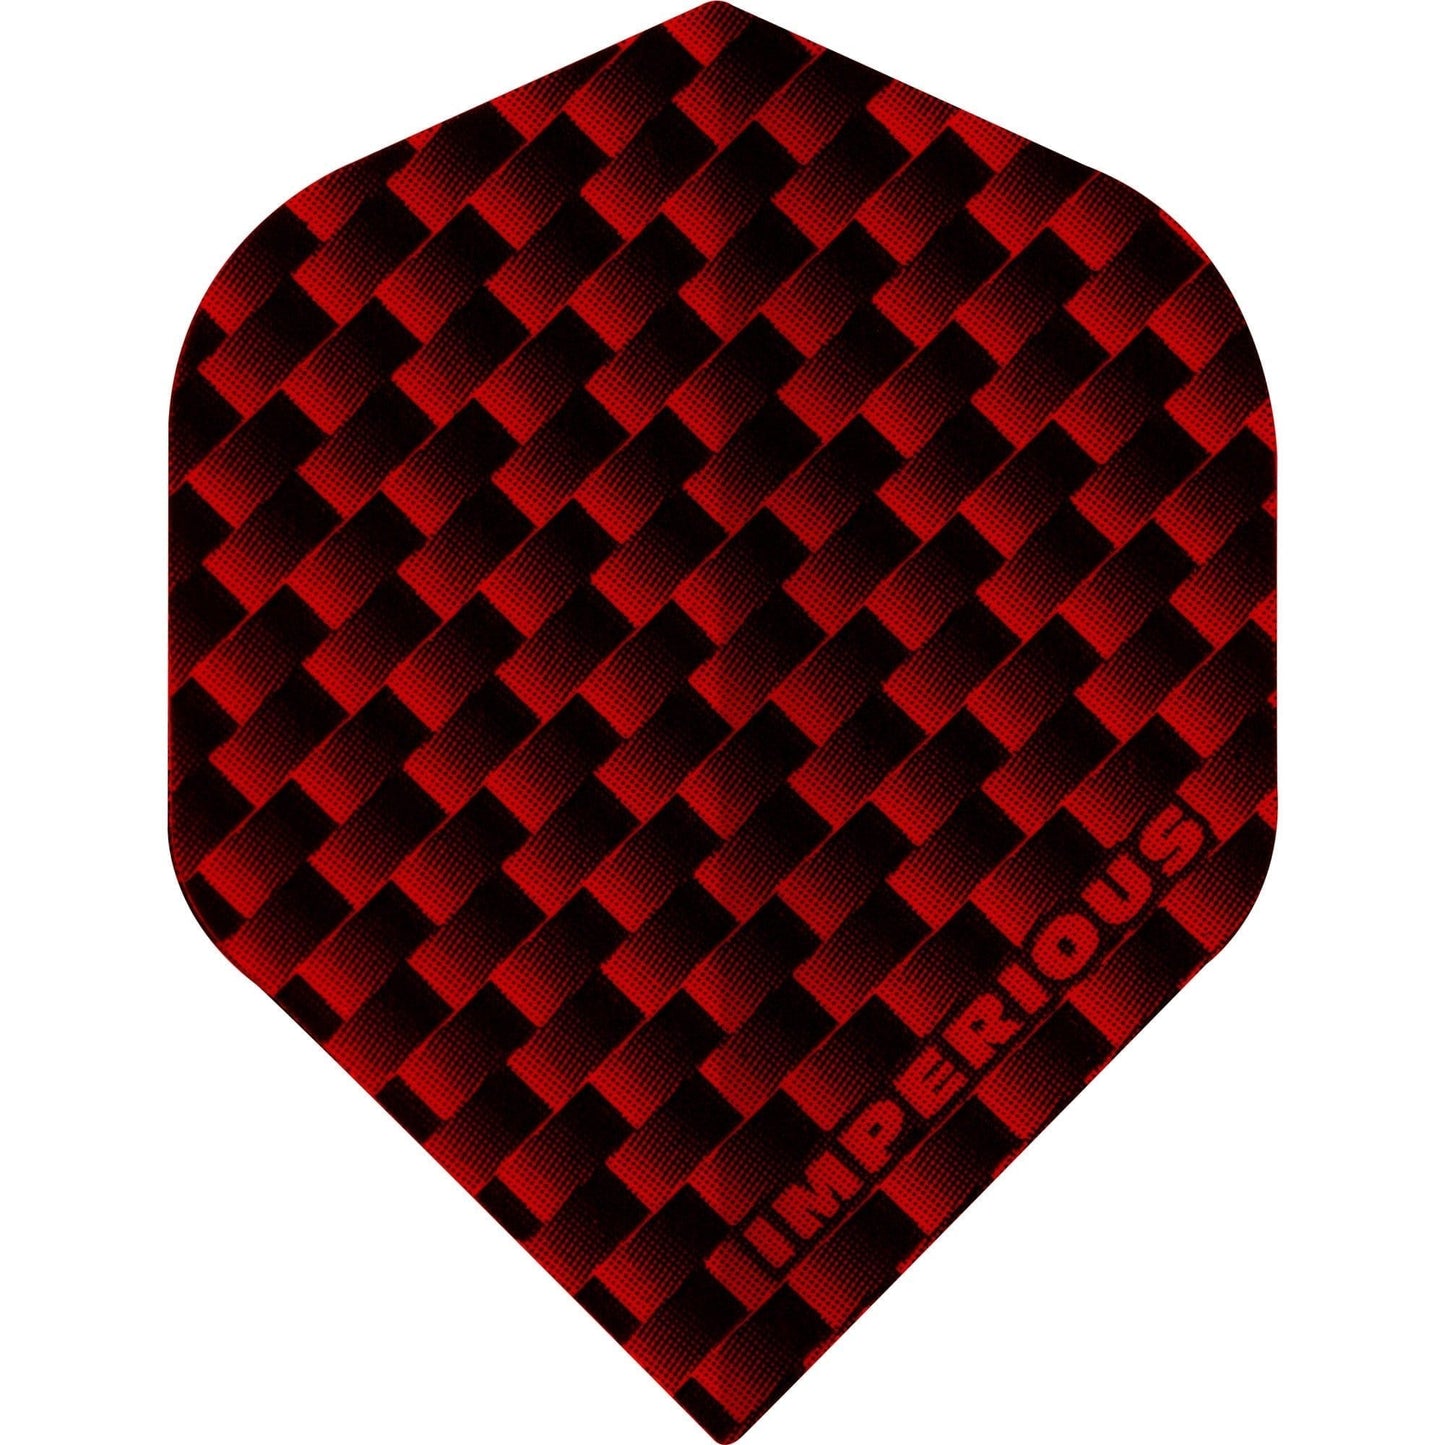 Ruthless - Imperious - Dart Flights - 100 Micron - No2 - Std Red